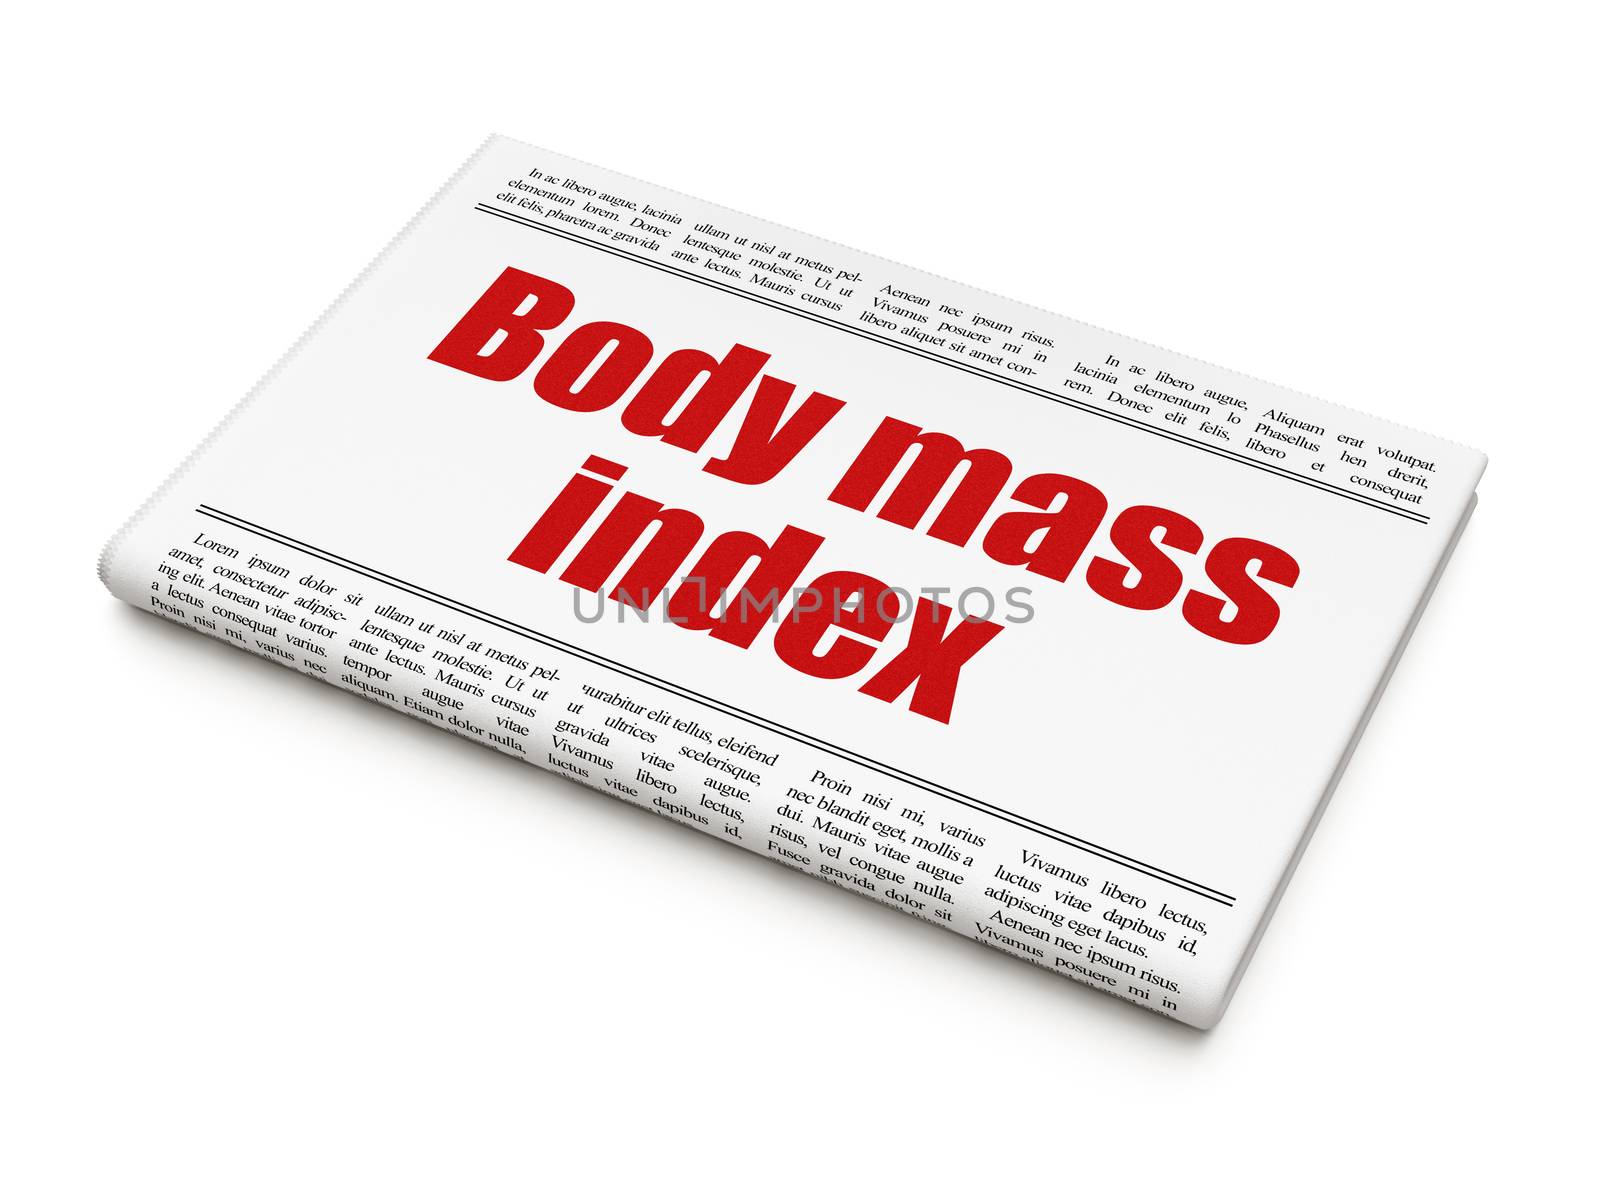 Healthcare concept: newspaper headline Body Mass Index on White background, 3D rendering